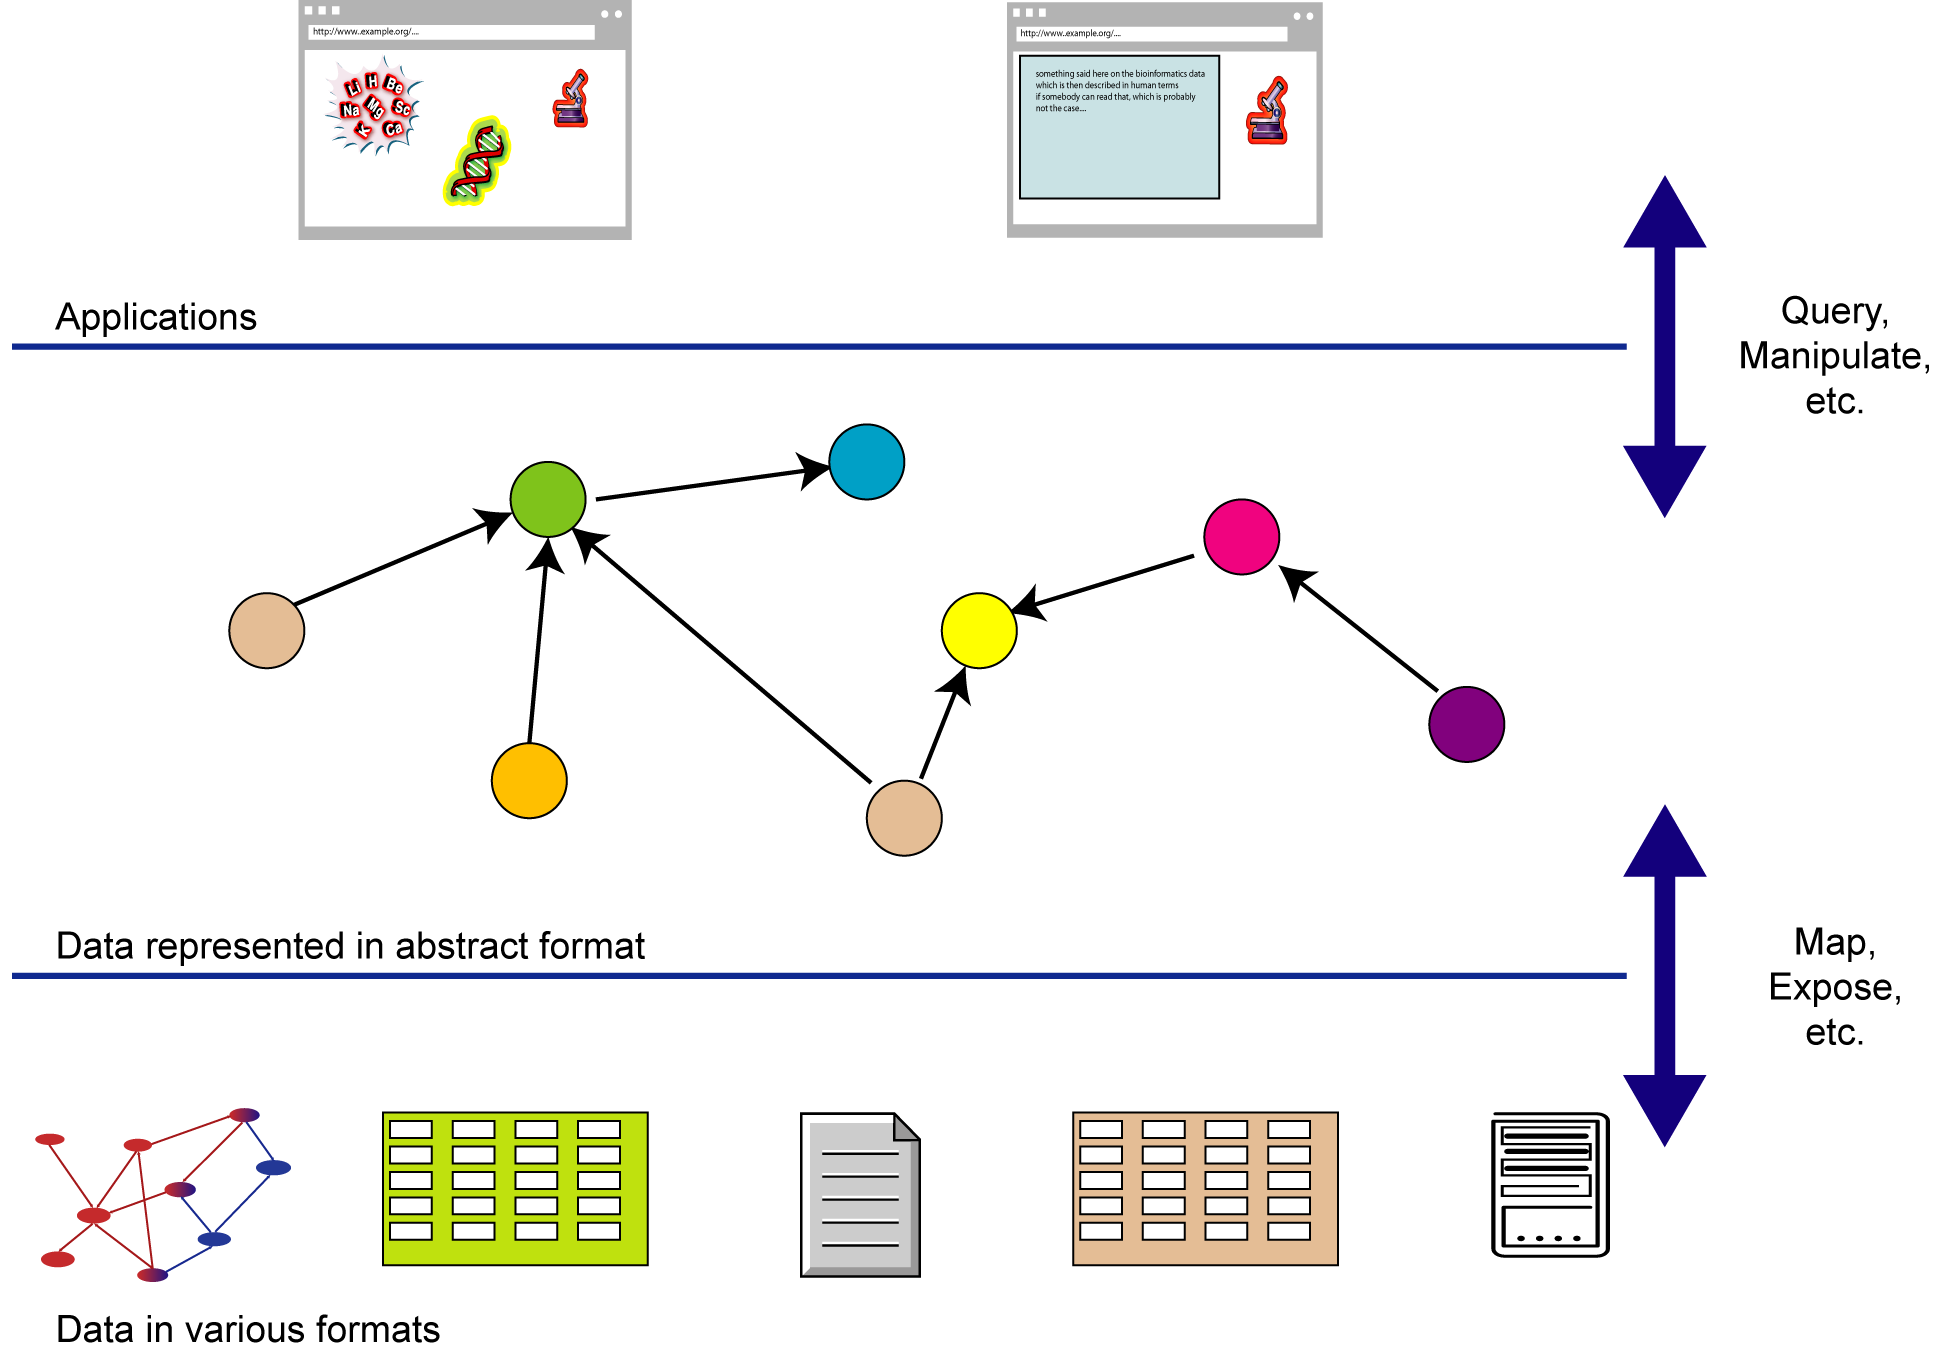 Three layer figure; from top to bottom: applications, graph, and all kinds of data in different formats, labelled in general terms